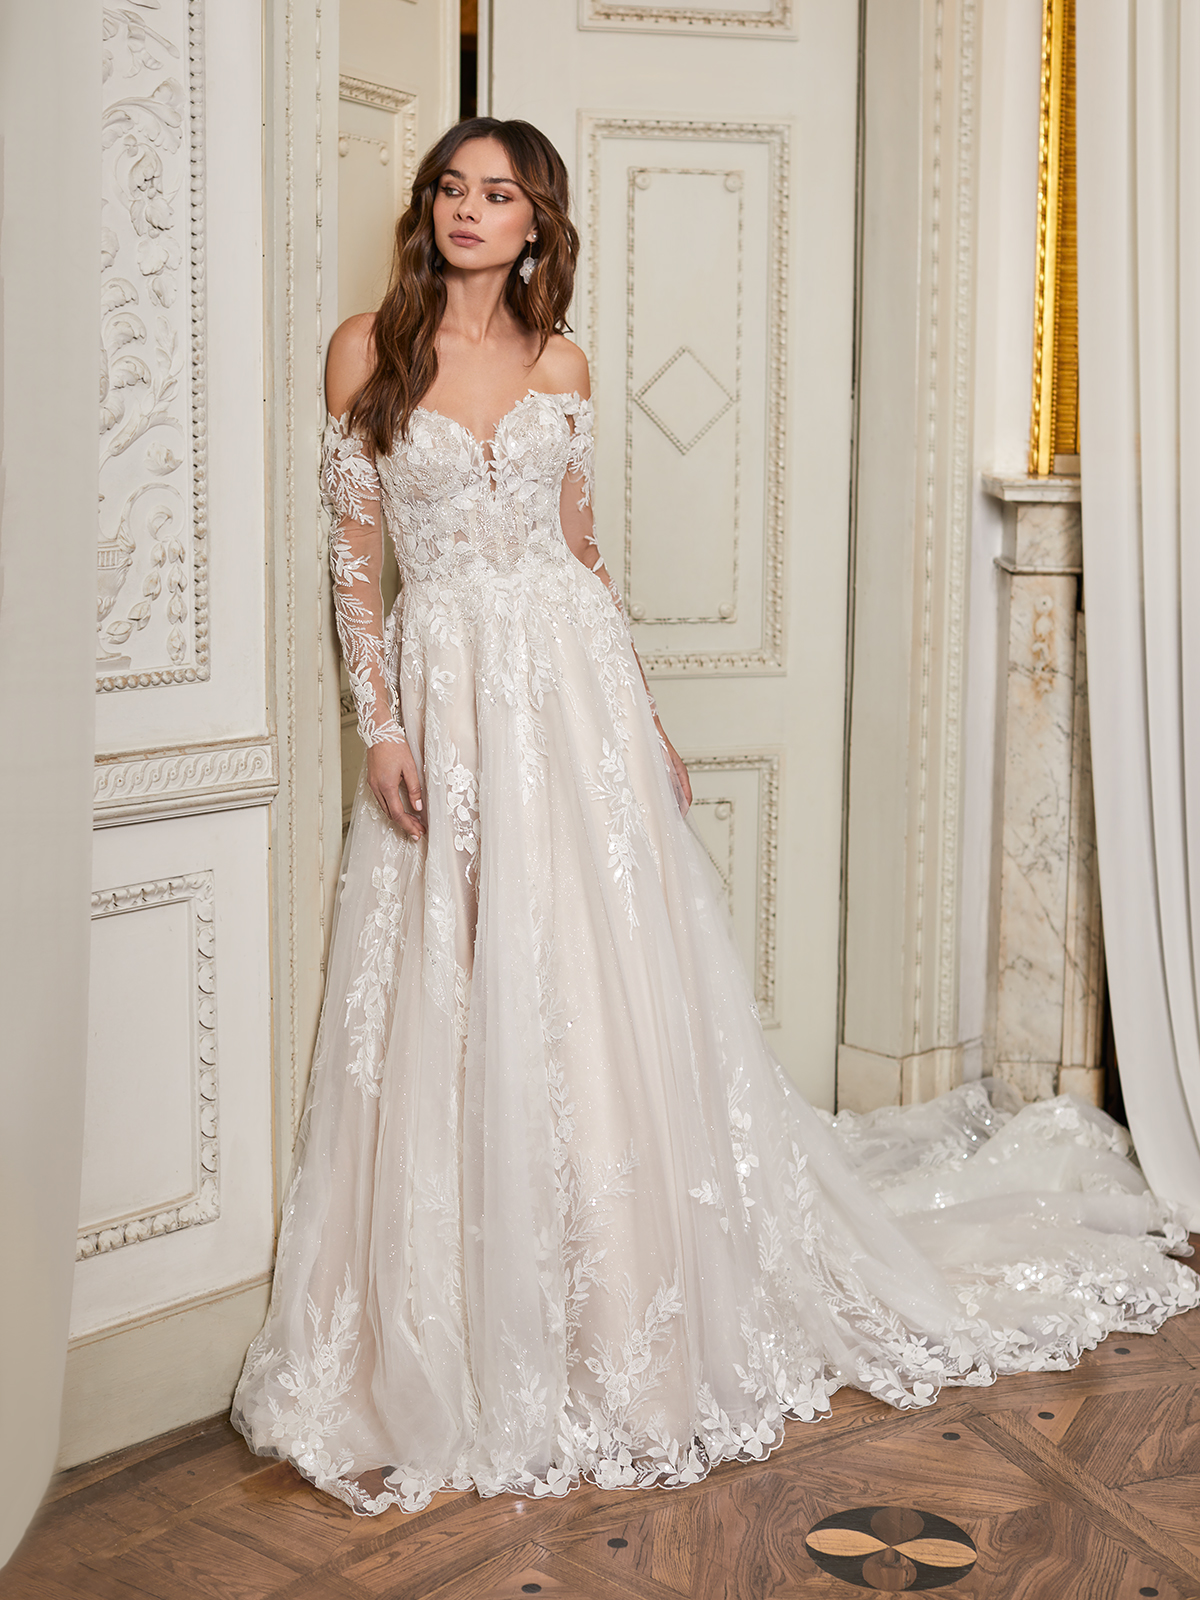 11 Winter Wedding Dresses 2021 For Every Bridal Style